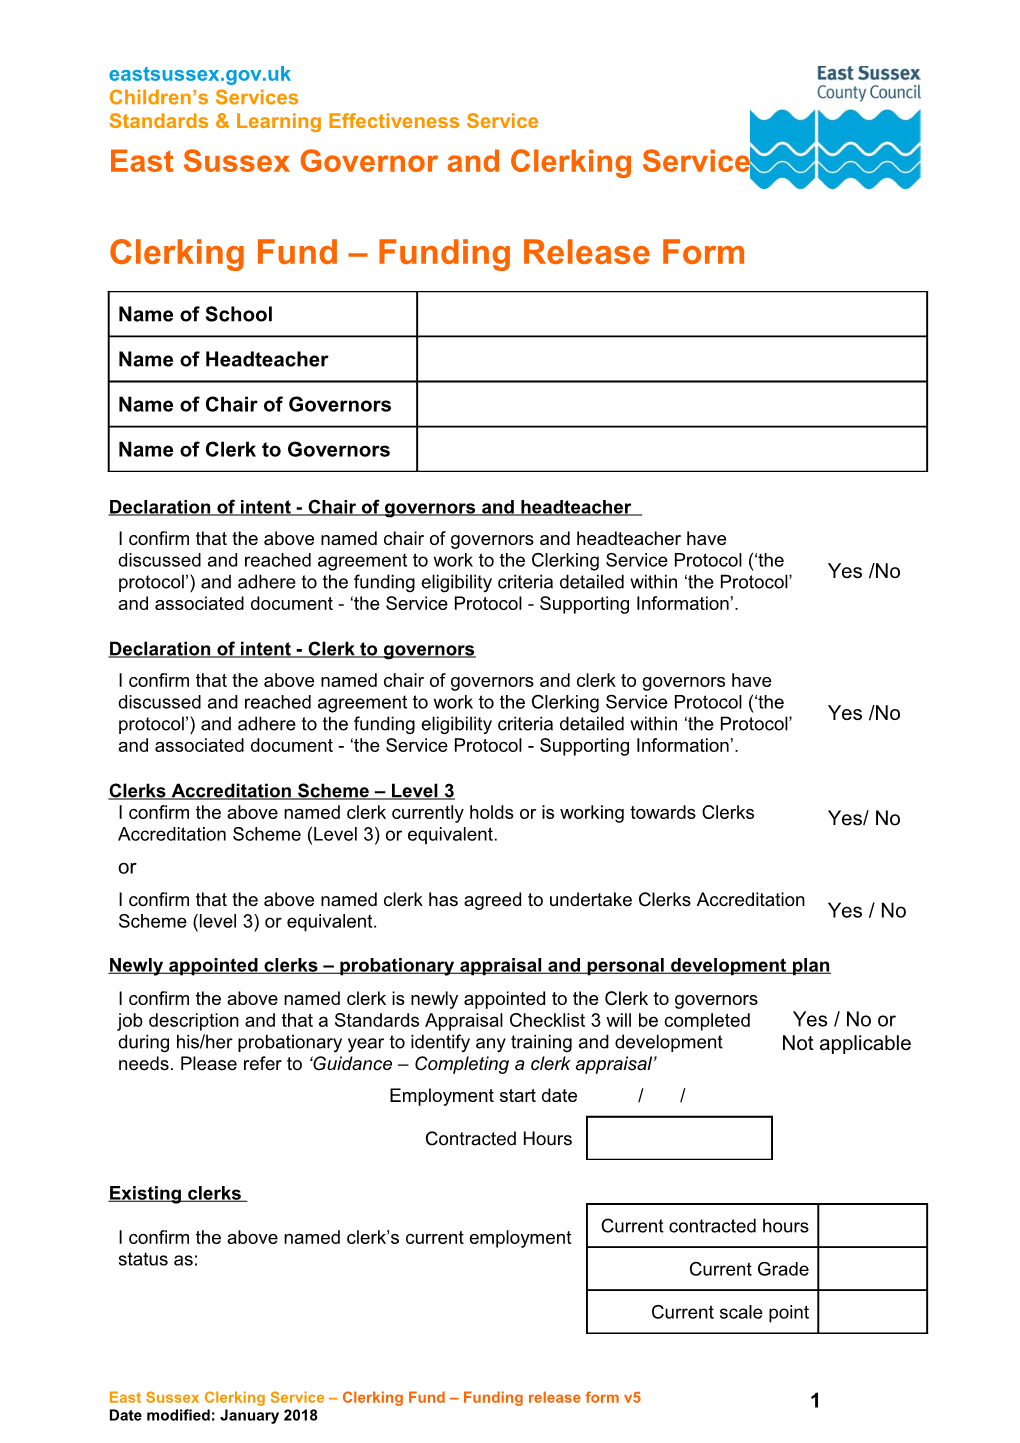 Clerking Fund Funding Release Form